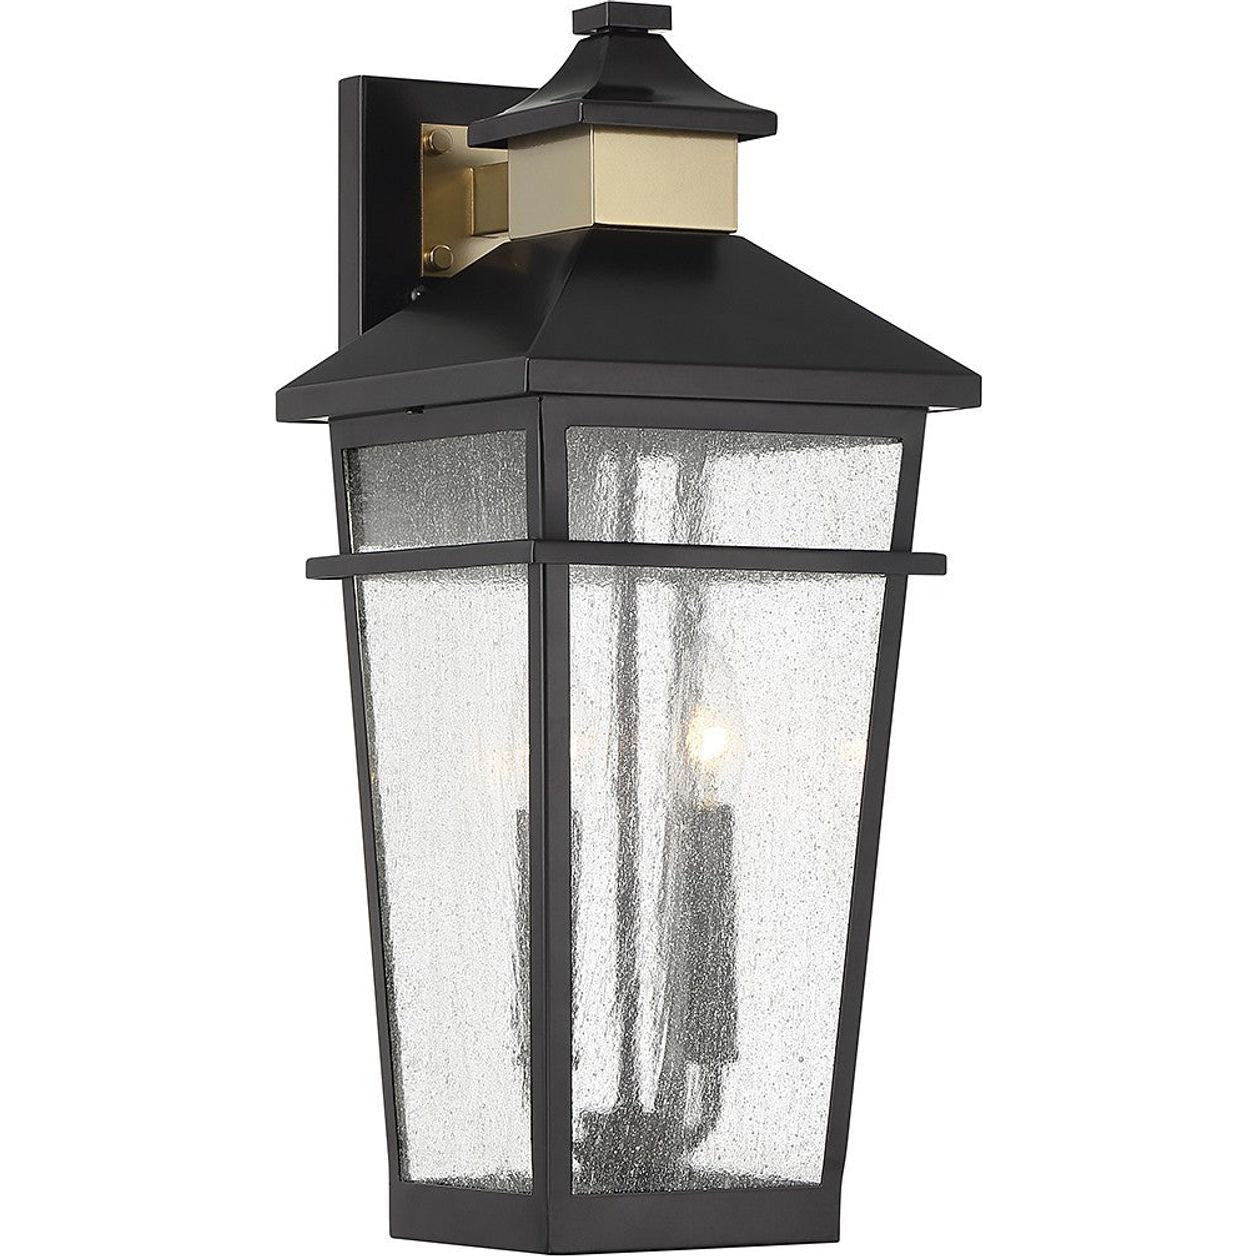 Savoy House - 5-714-143 - Two Light Outdoor Wall Lantern - Kingsley - Matte Black with Warm Brass